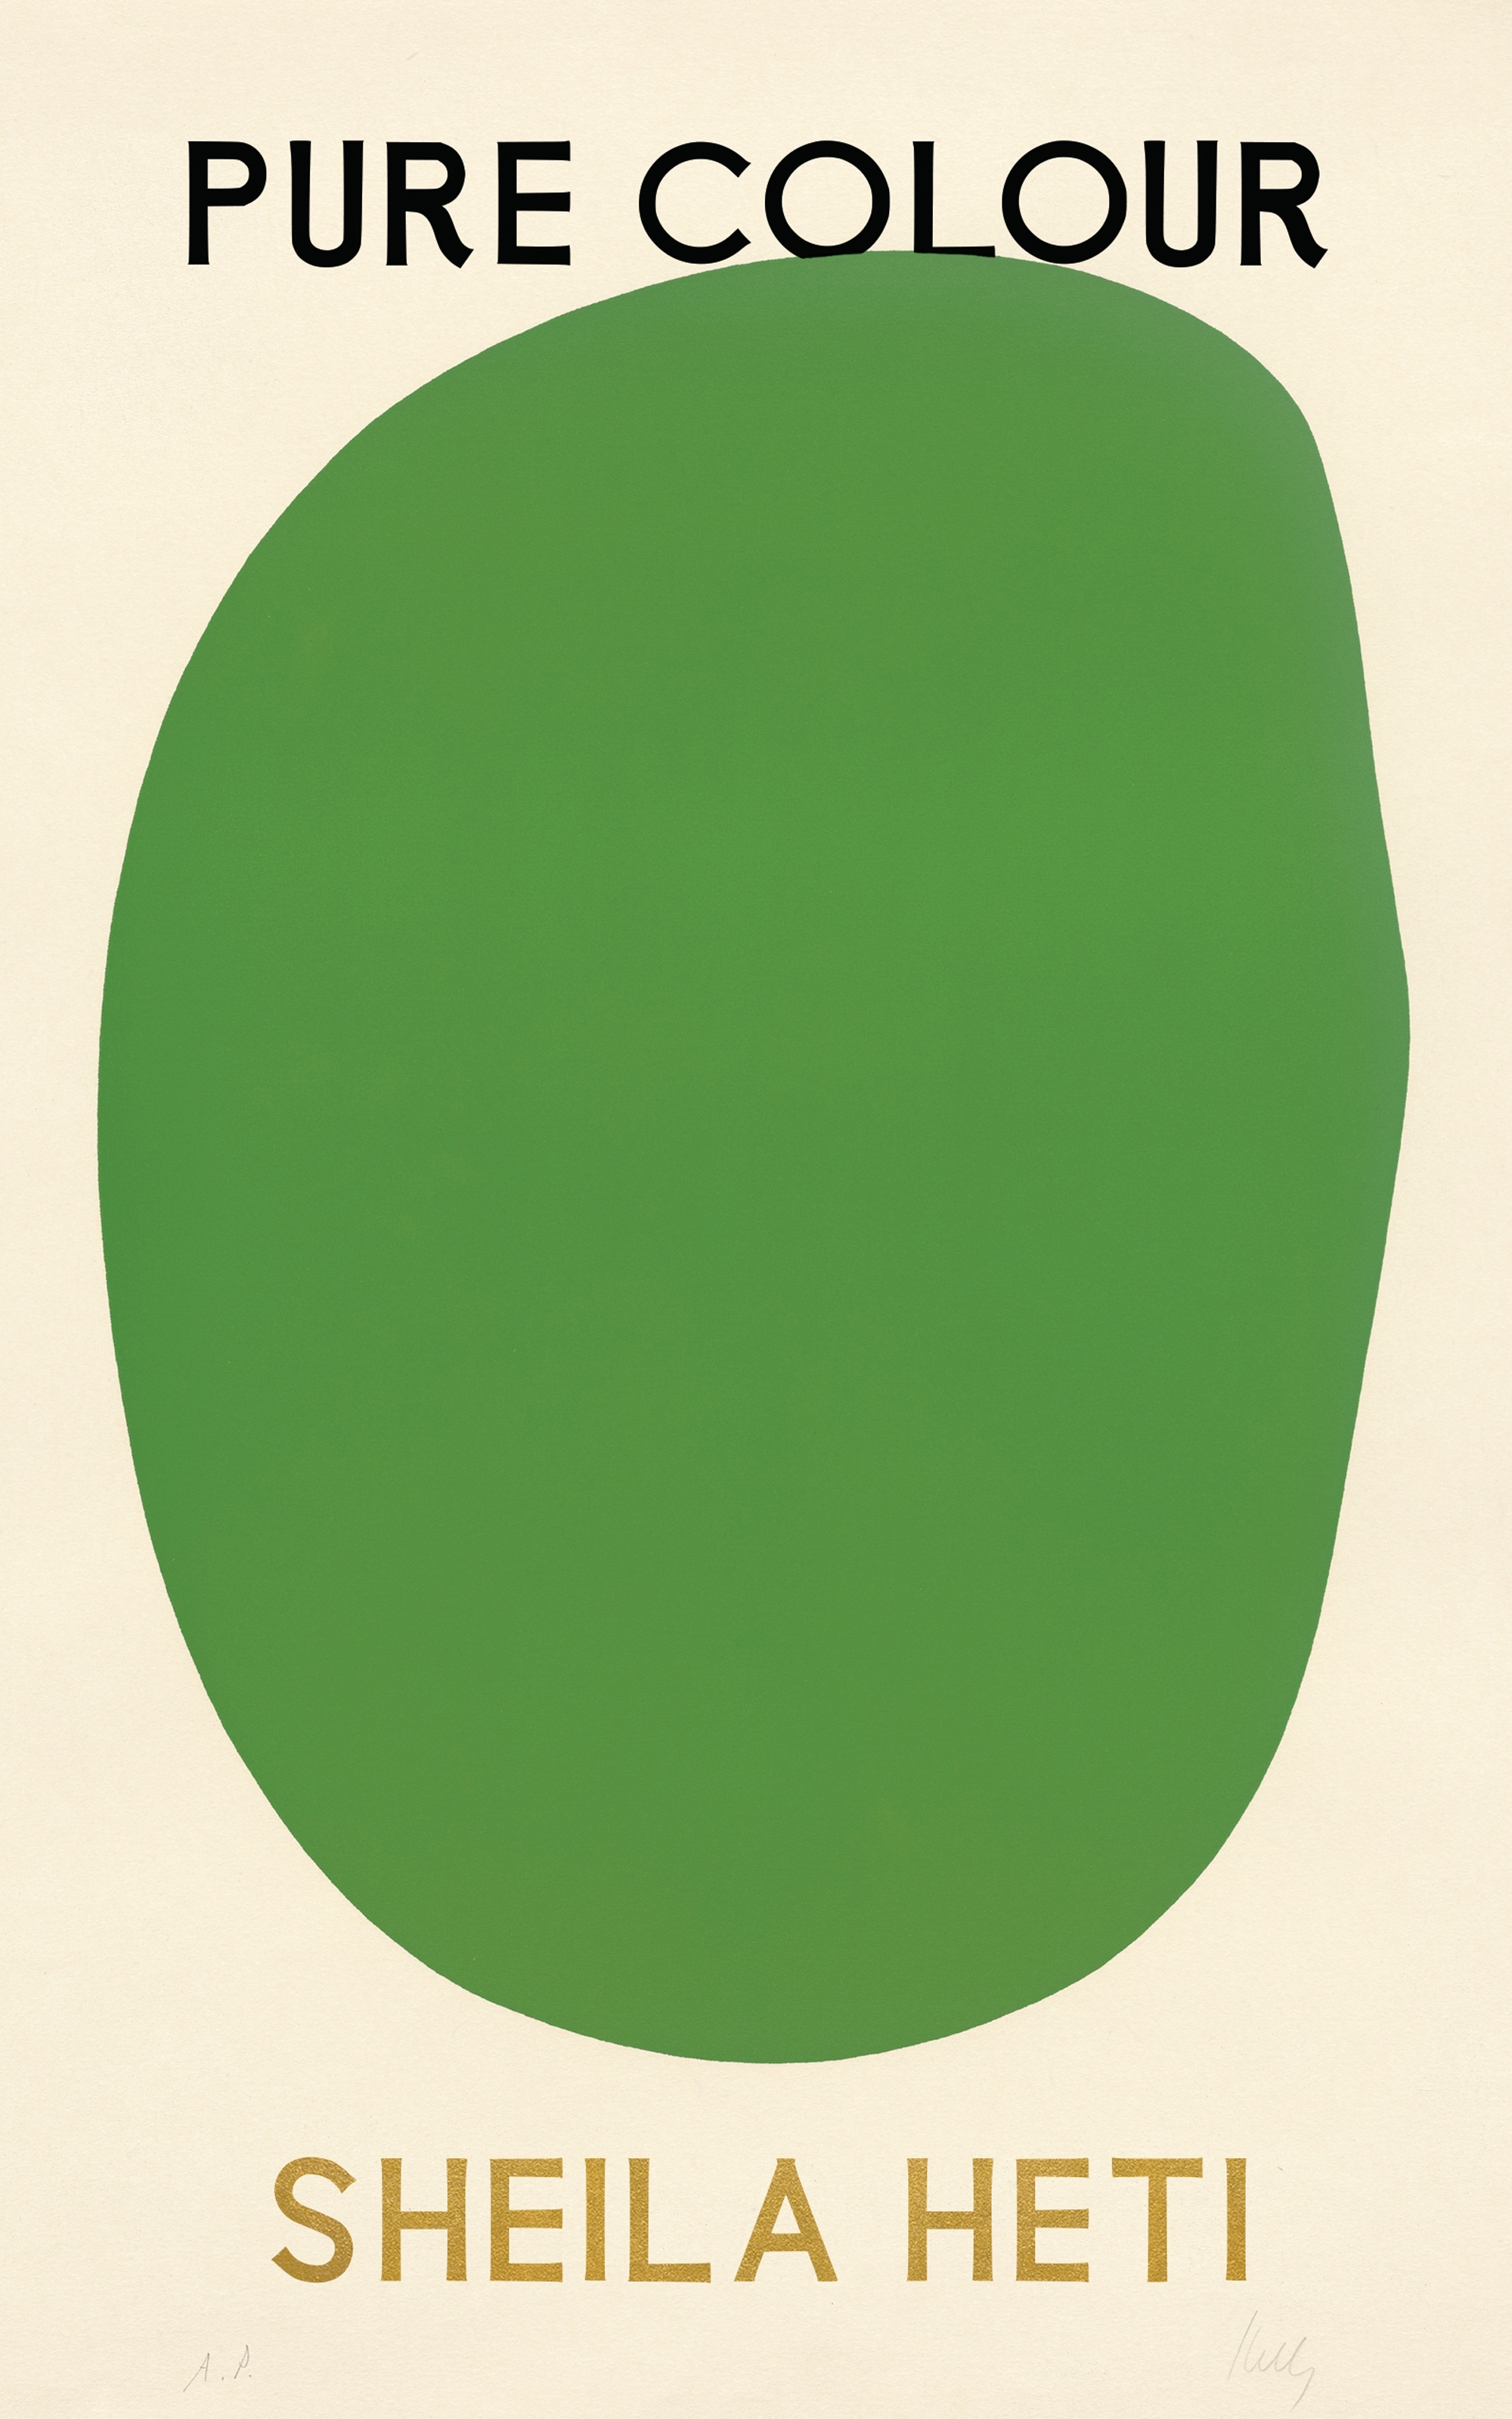 A book cover with an abstract image of a large, irregular green circle sits on a cream background.